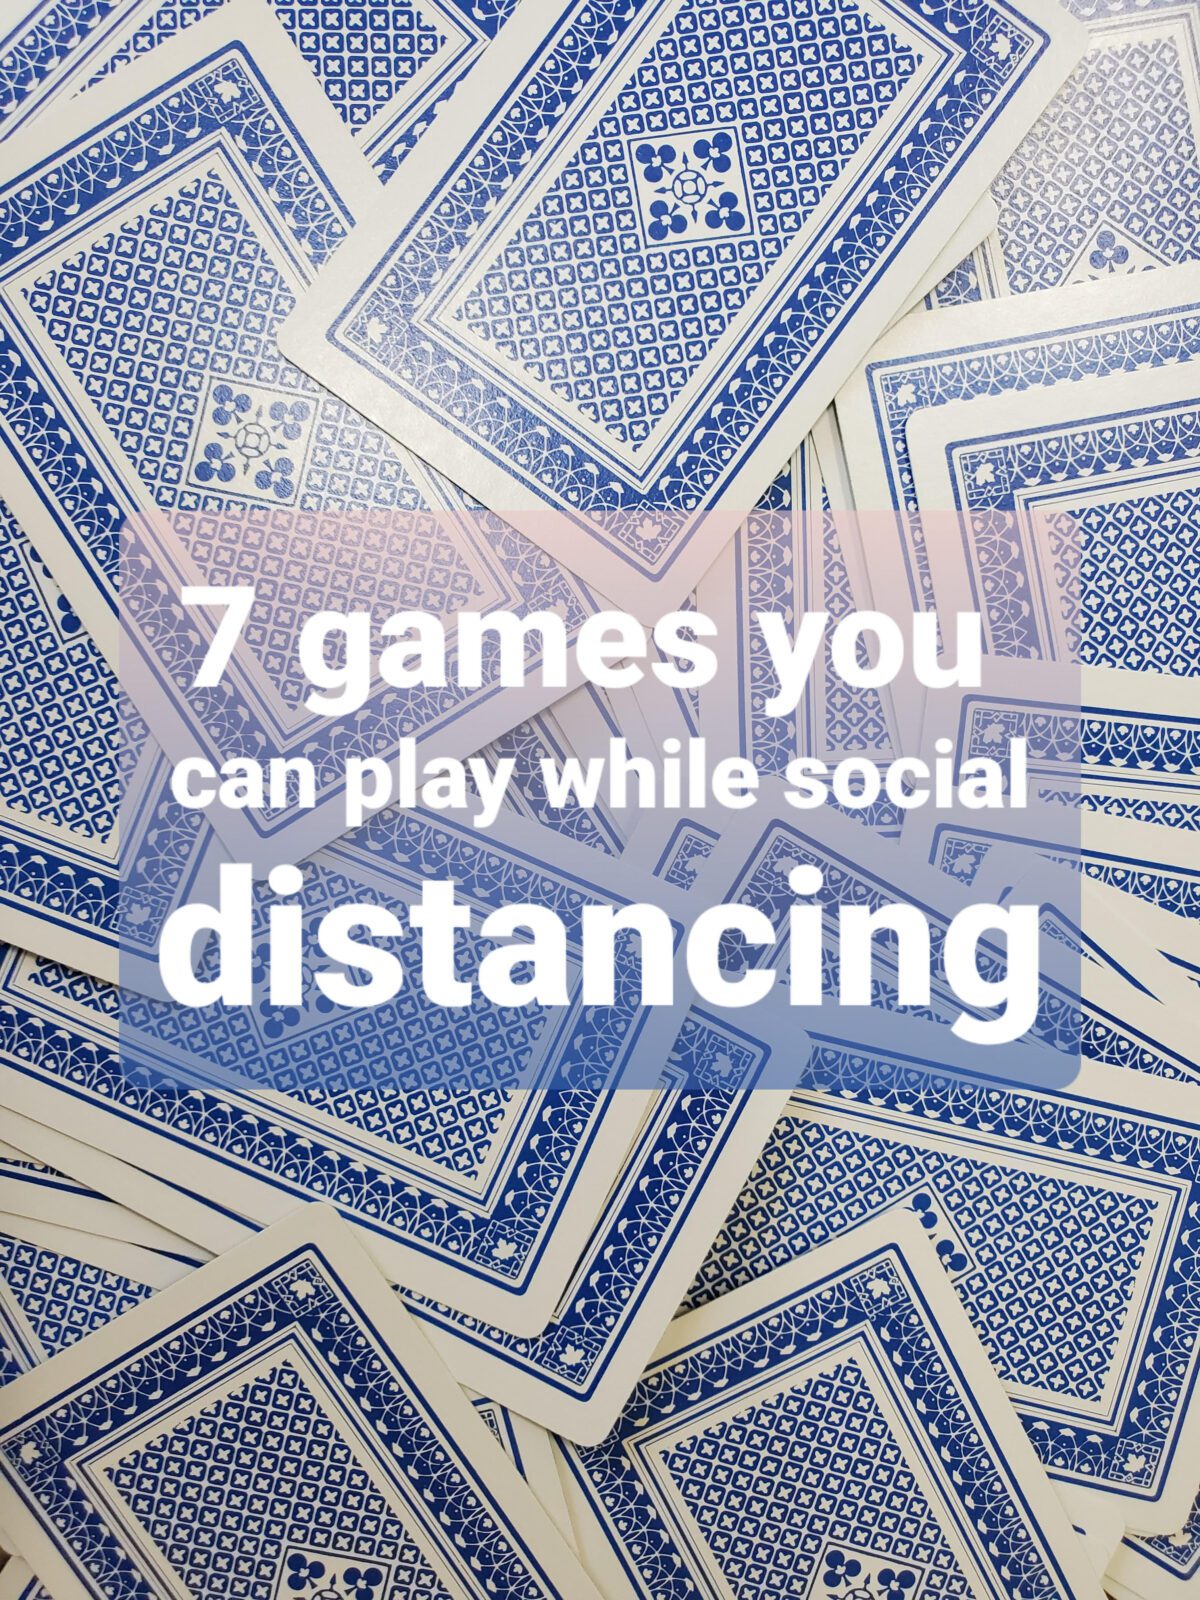 7 games you can play while social distancing